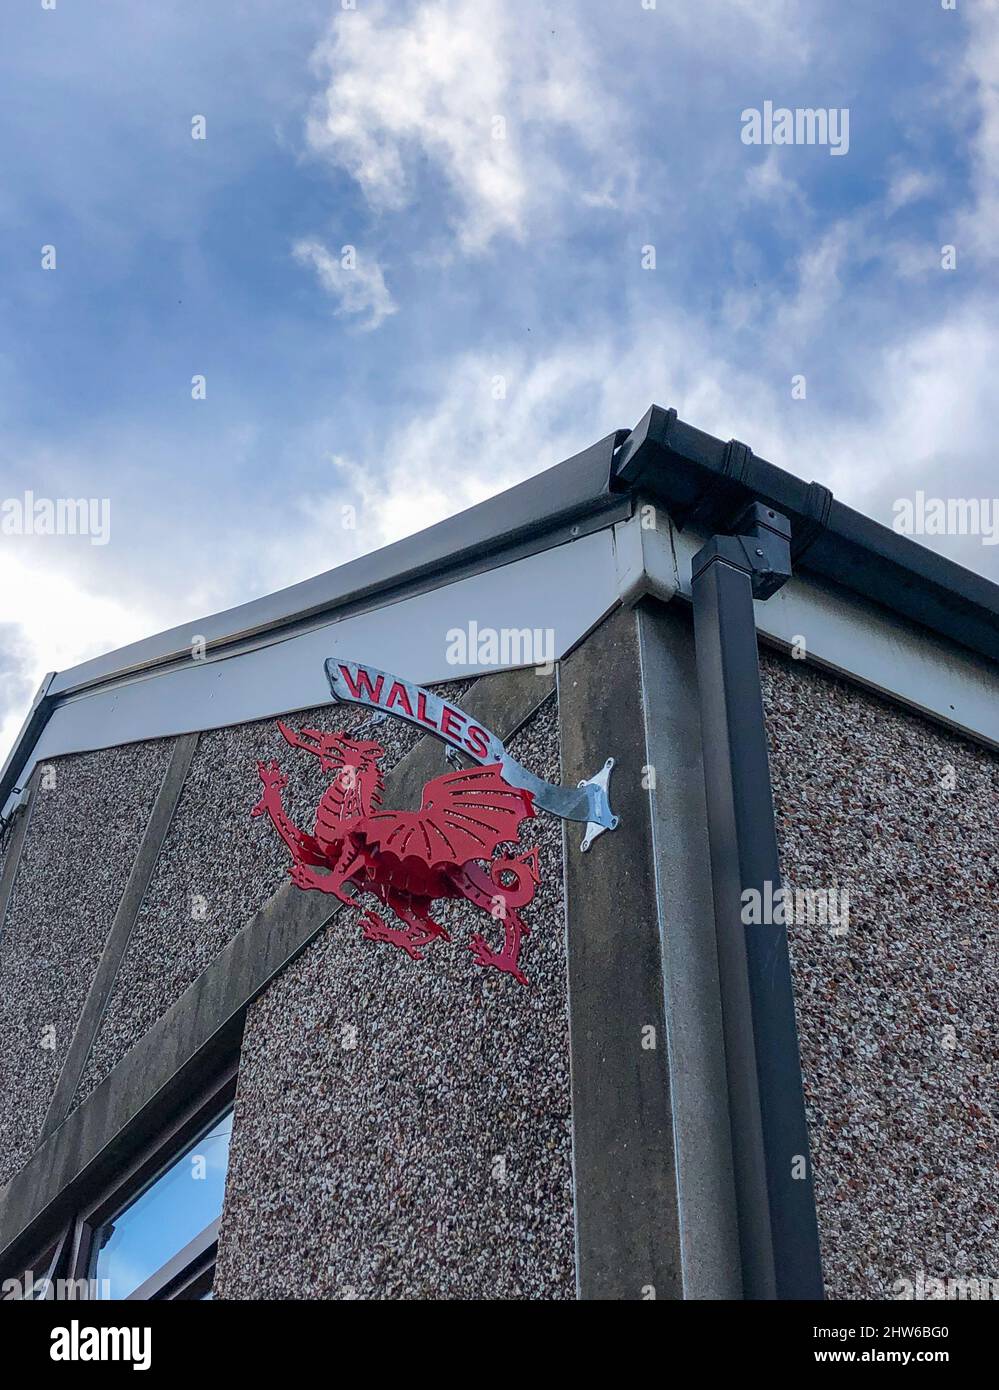 A symbol of Wales on the outside of a house in Aberdare, South Wales, UK. Stock Photo